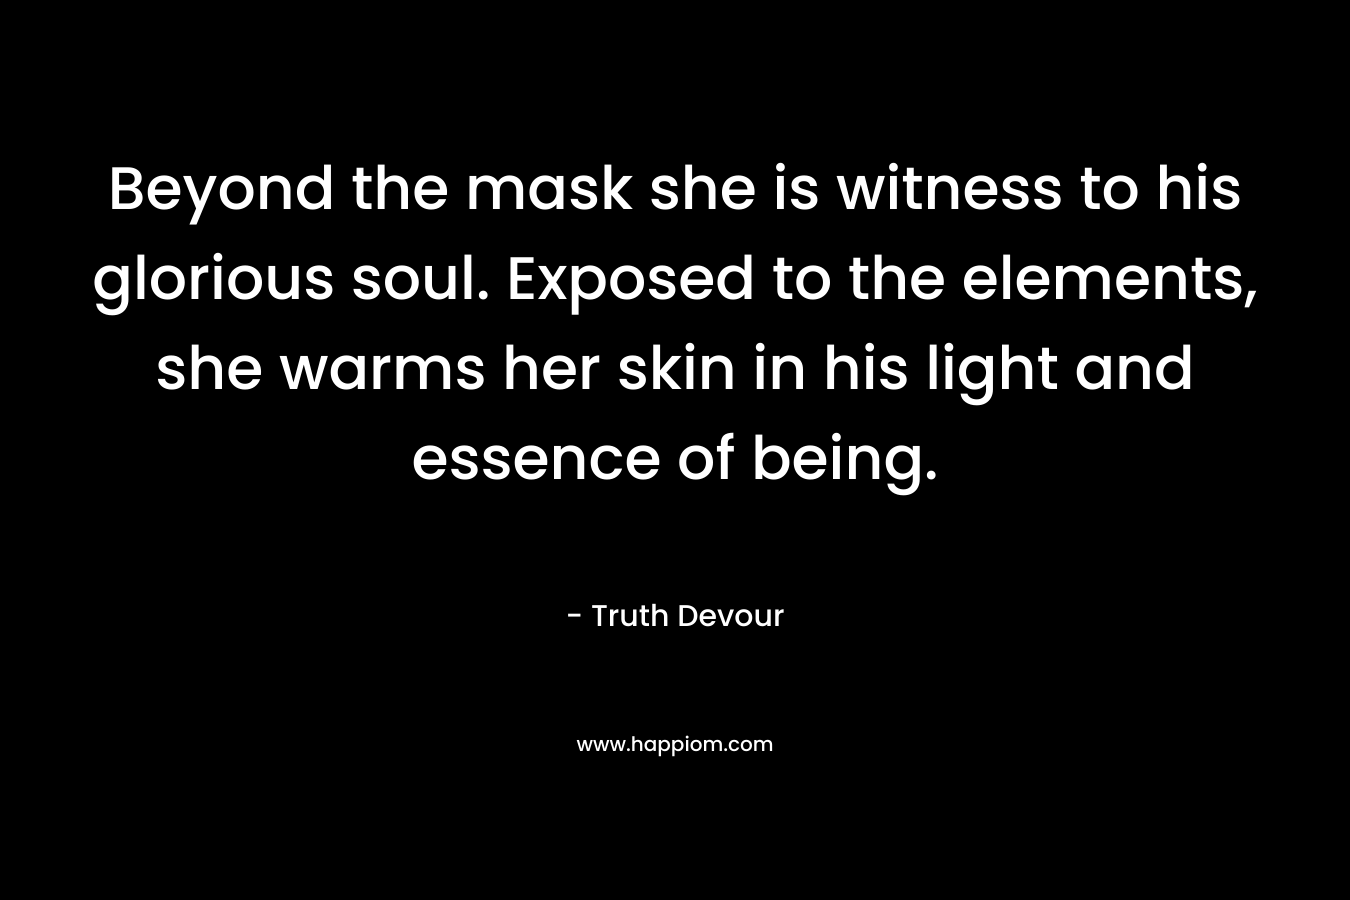 Beyond the mask she is witness to his glorious soul. Exposed to the elements, she warms her skin in his light and essence of being.